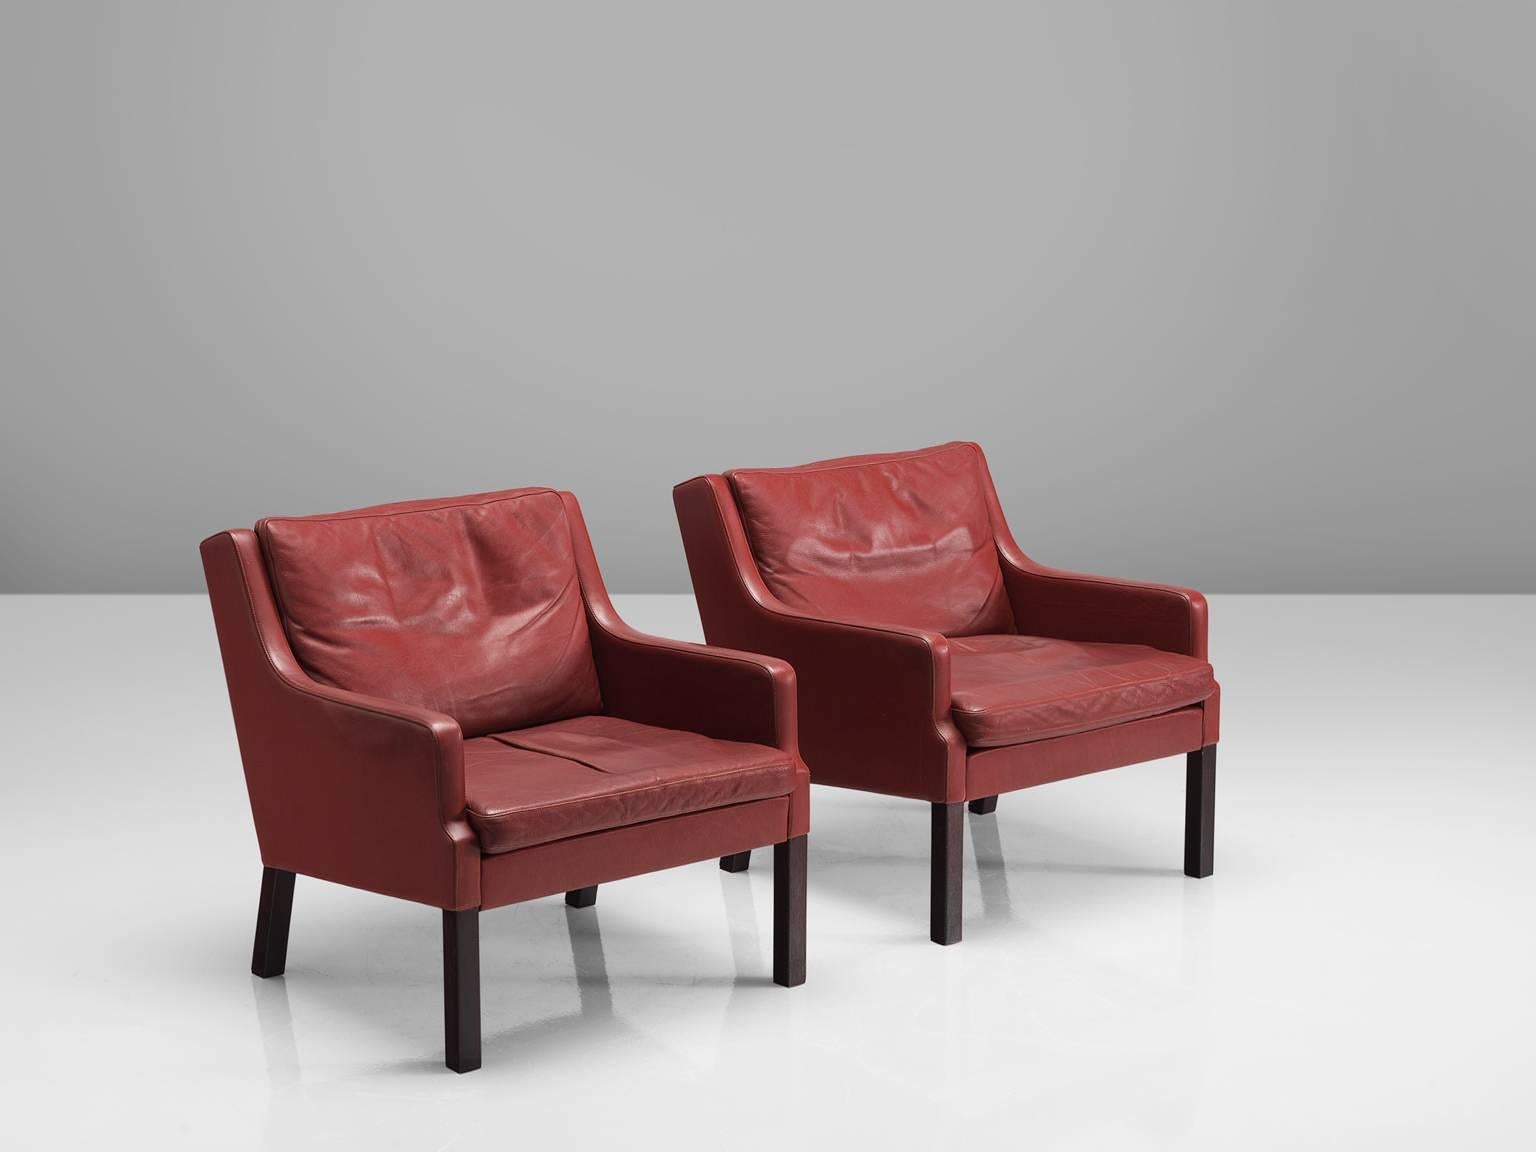 Lounge chairs, leather, mahogany, Denmark, circa 1960s–1970s.

This set is quintessentially Danish. Comfortable, well made and simplistic in design yet rich in use of material and finished. The set features patinated red to brown leather and